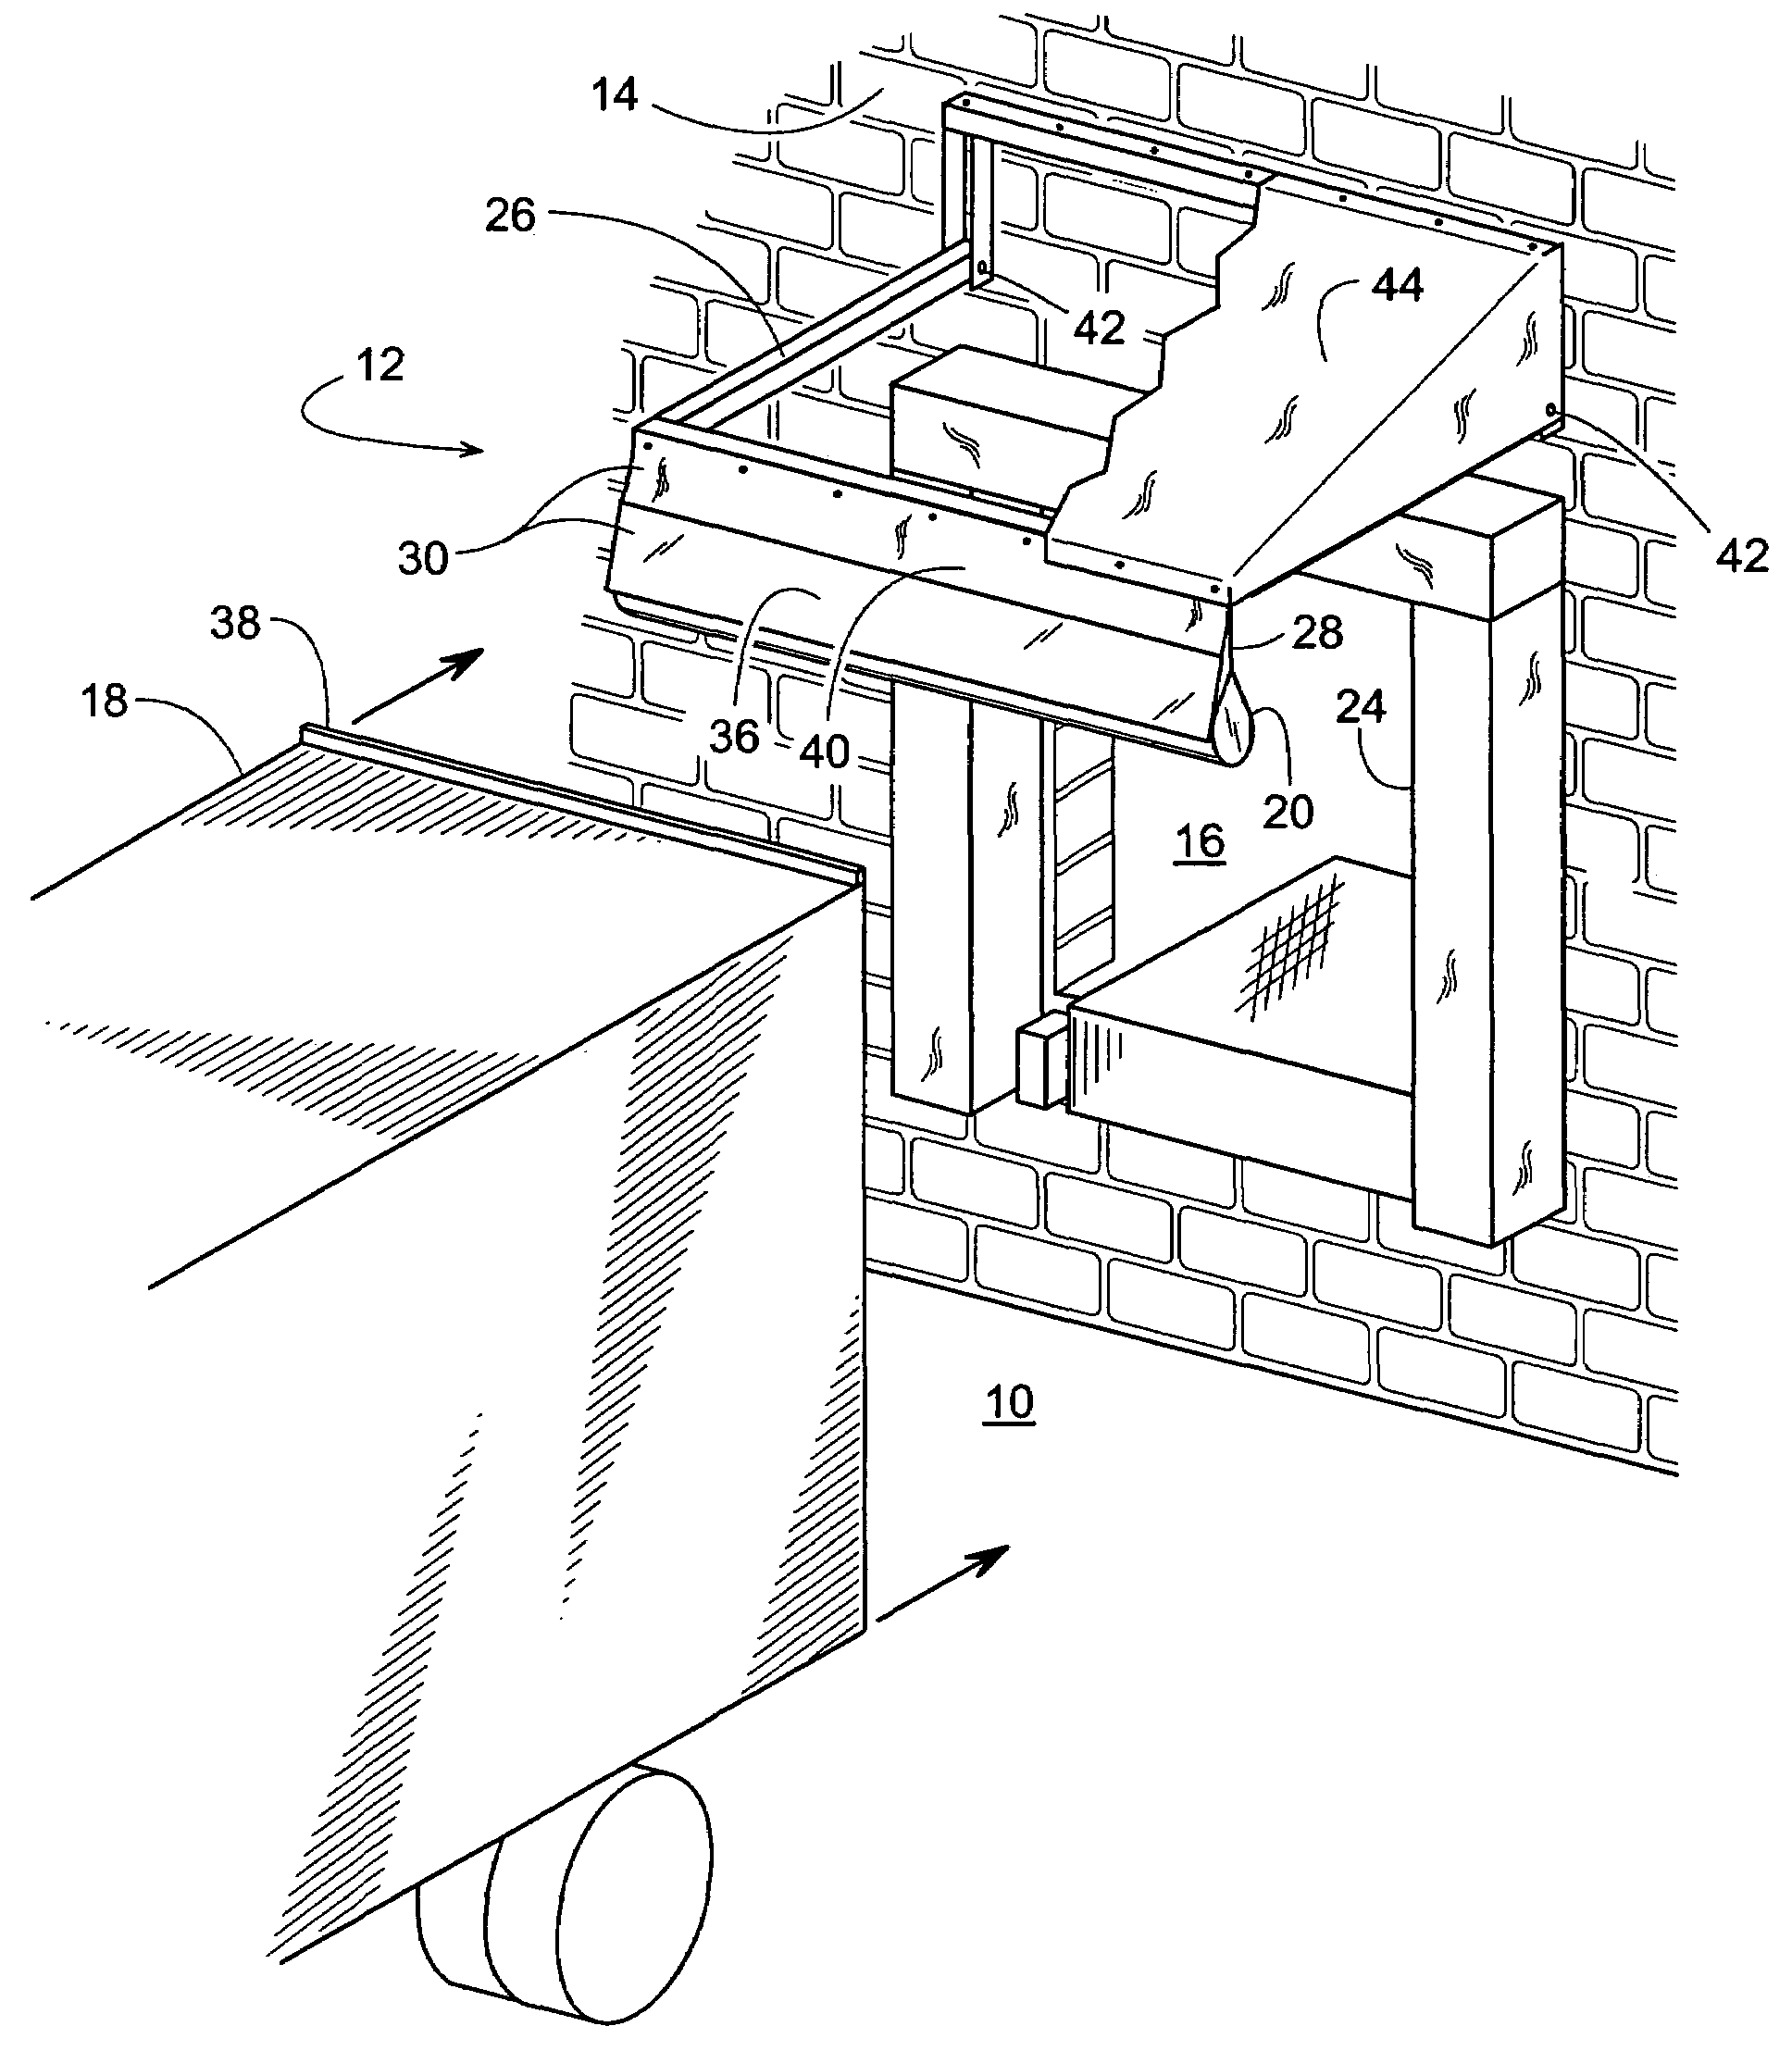 Water runoff deflector for a vehicle at a loading dock